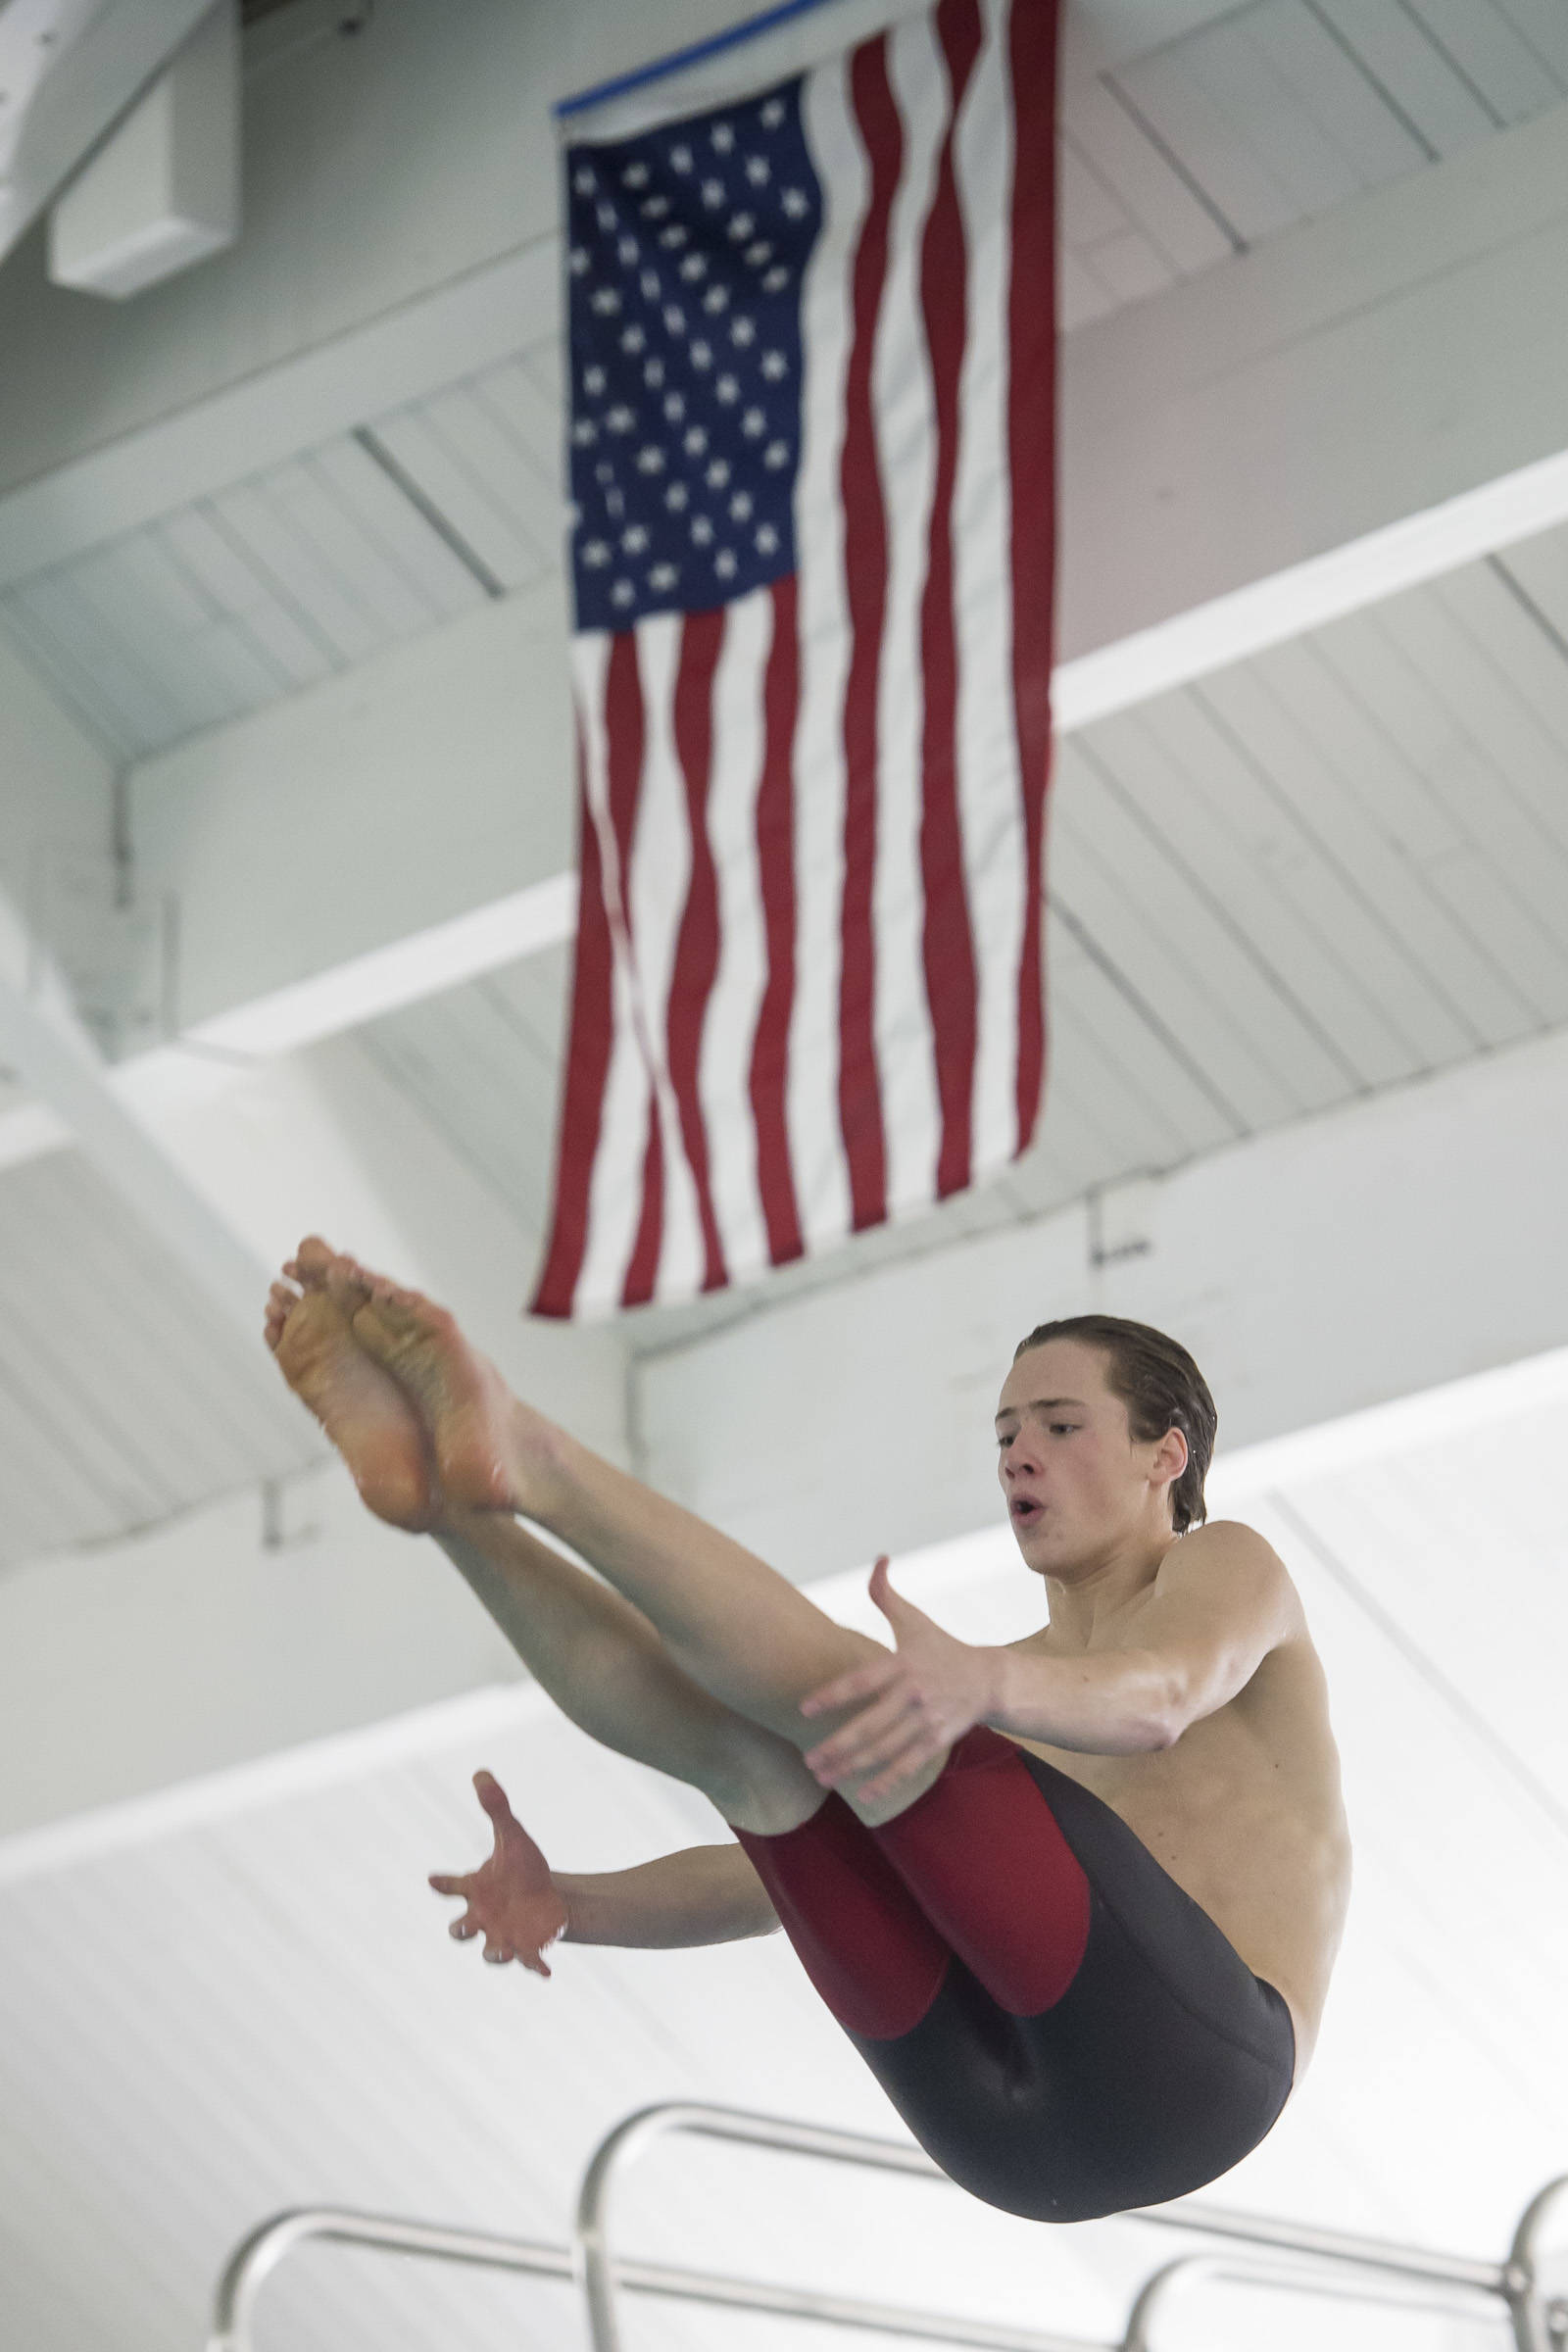 Juneau-Douglas High School senior Cian Hart practices his diving at the Augustus Brown Swimming Pool on Wednesday, Oct. 17, 2018. (Michael Penn | Juneau Empire)